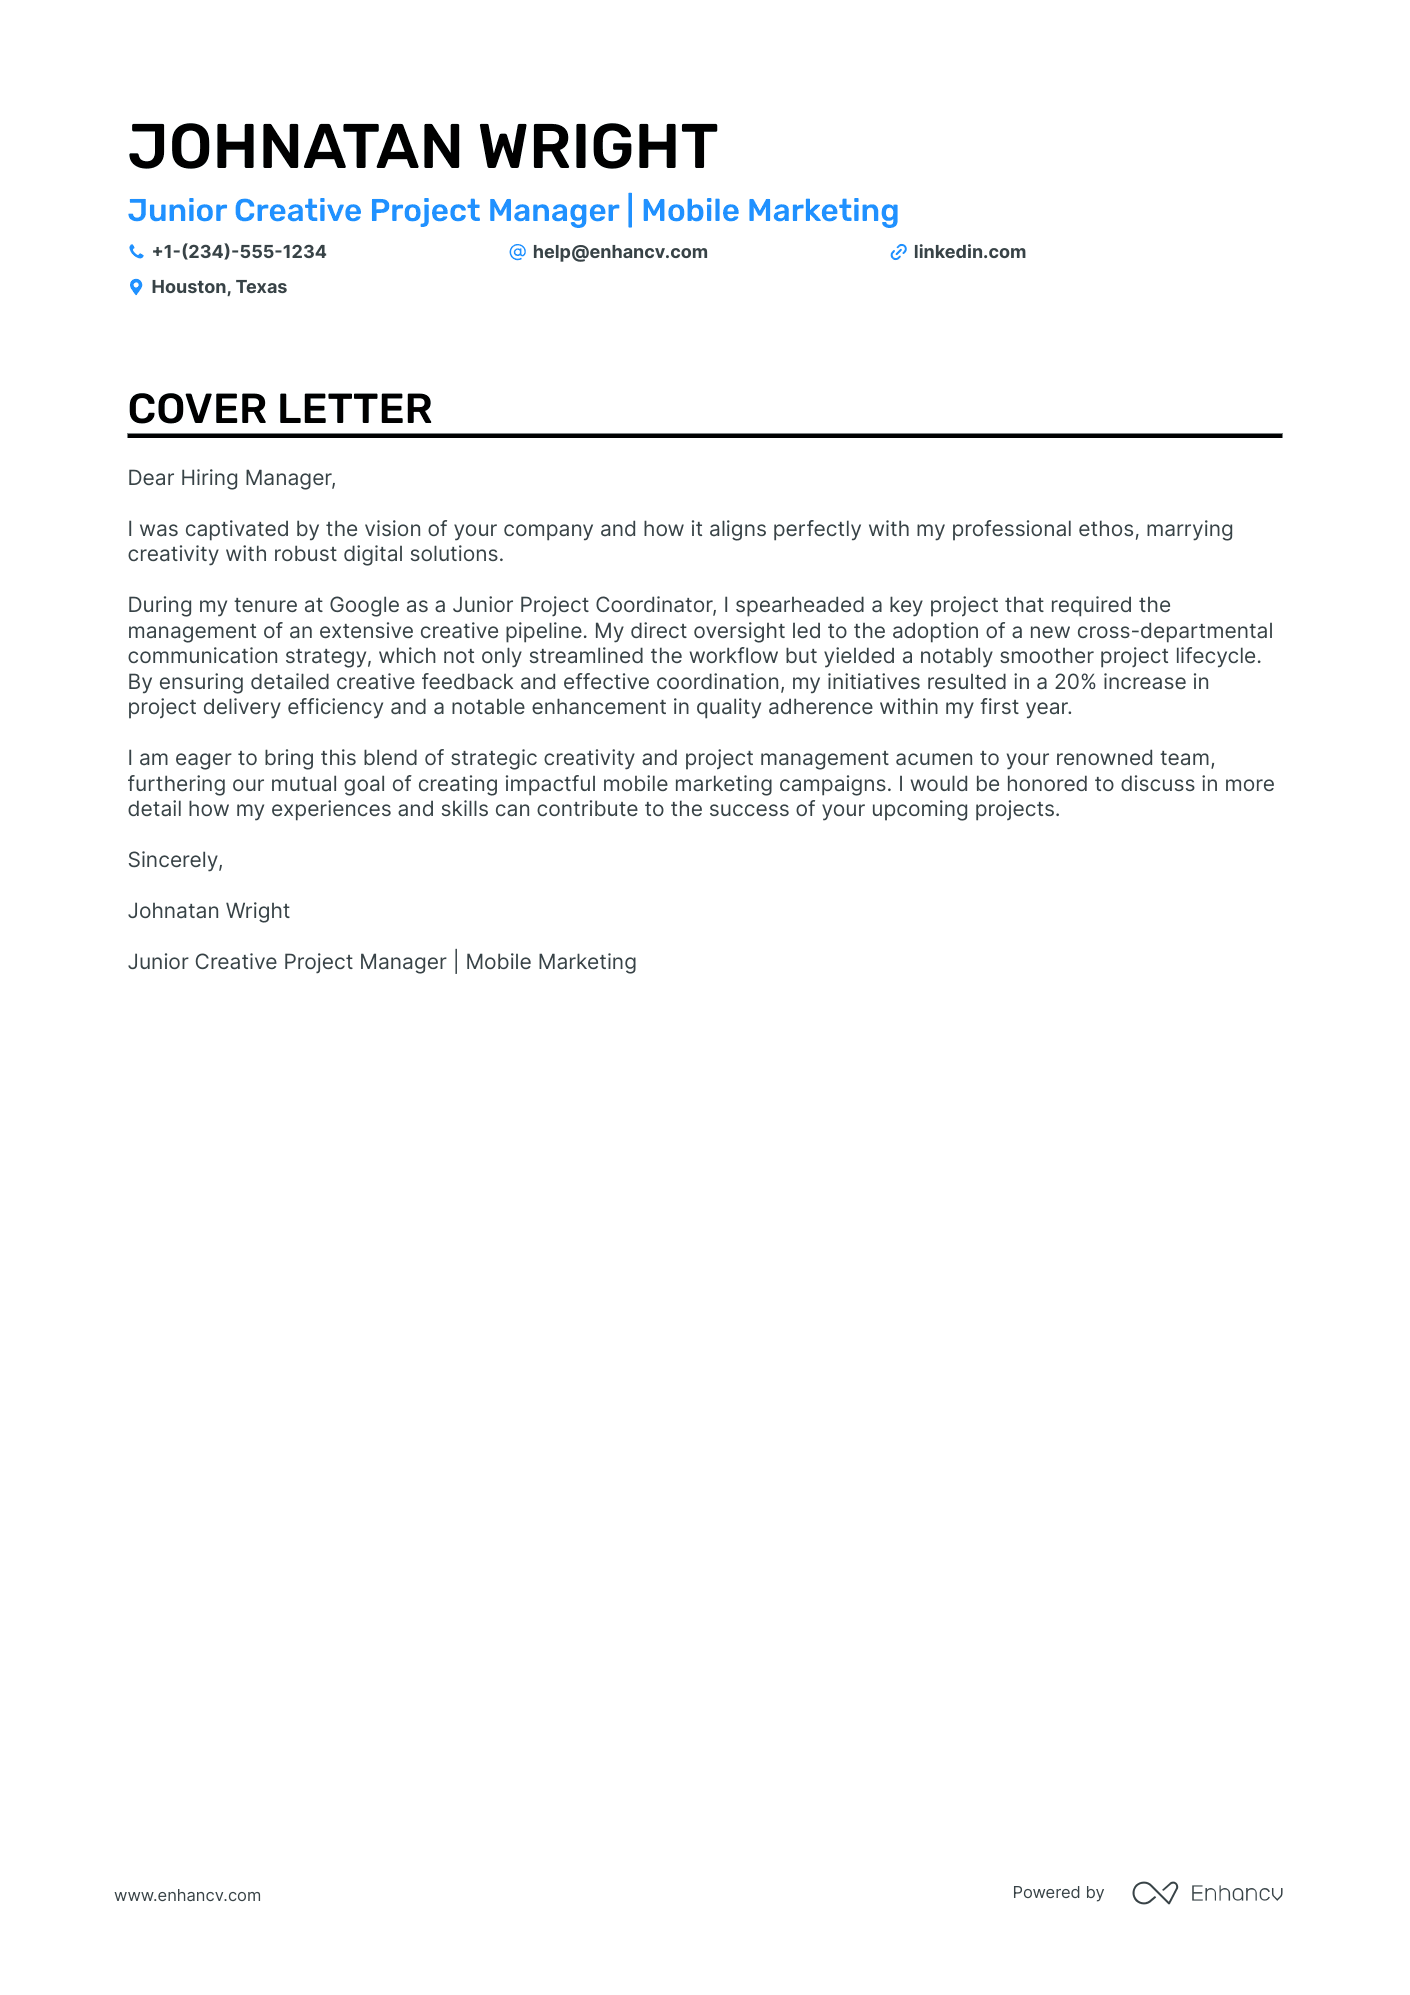 Junior Project Manager cover letter